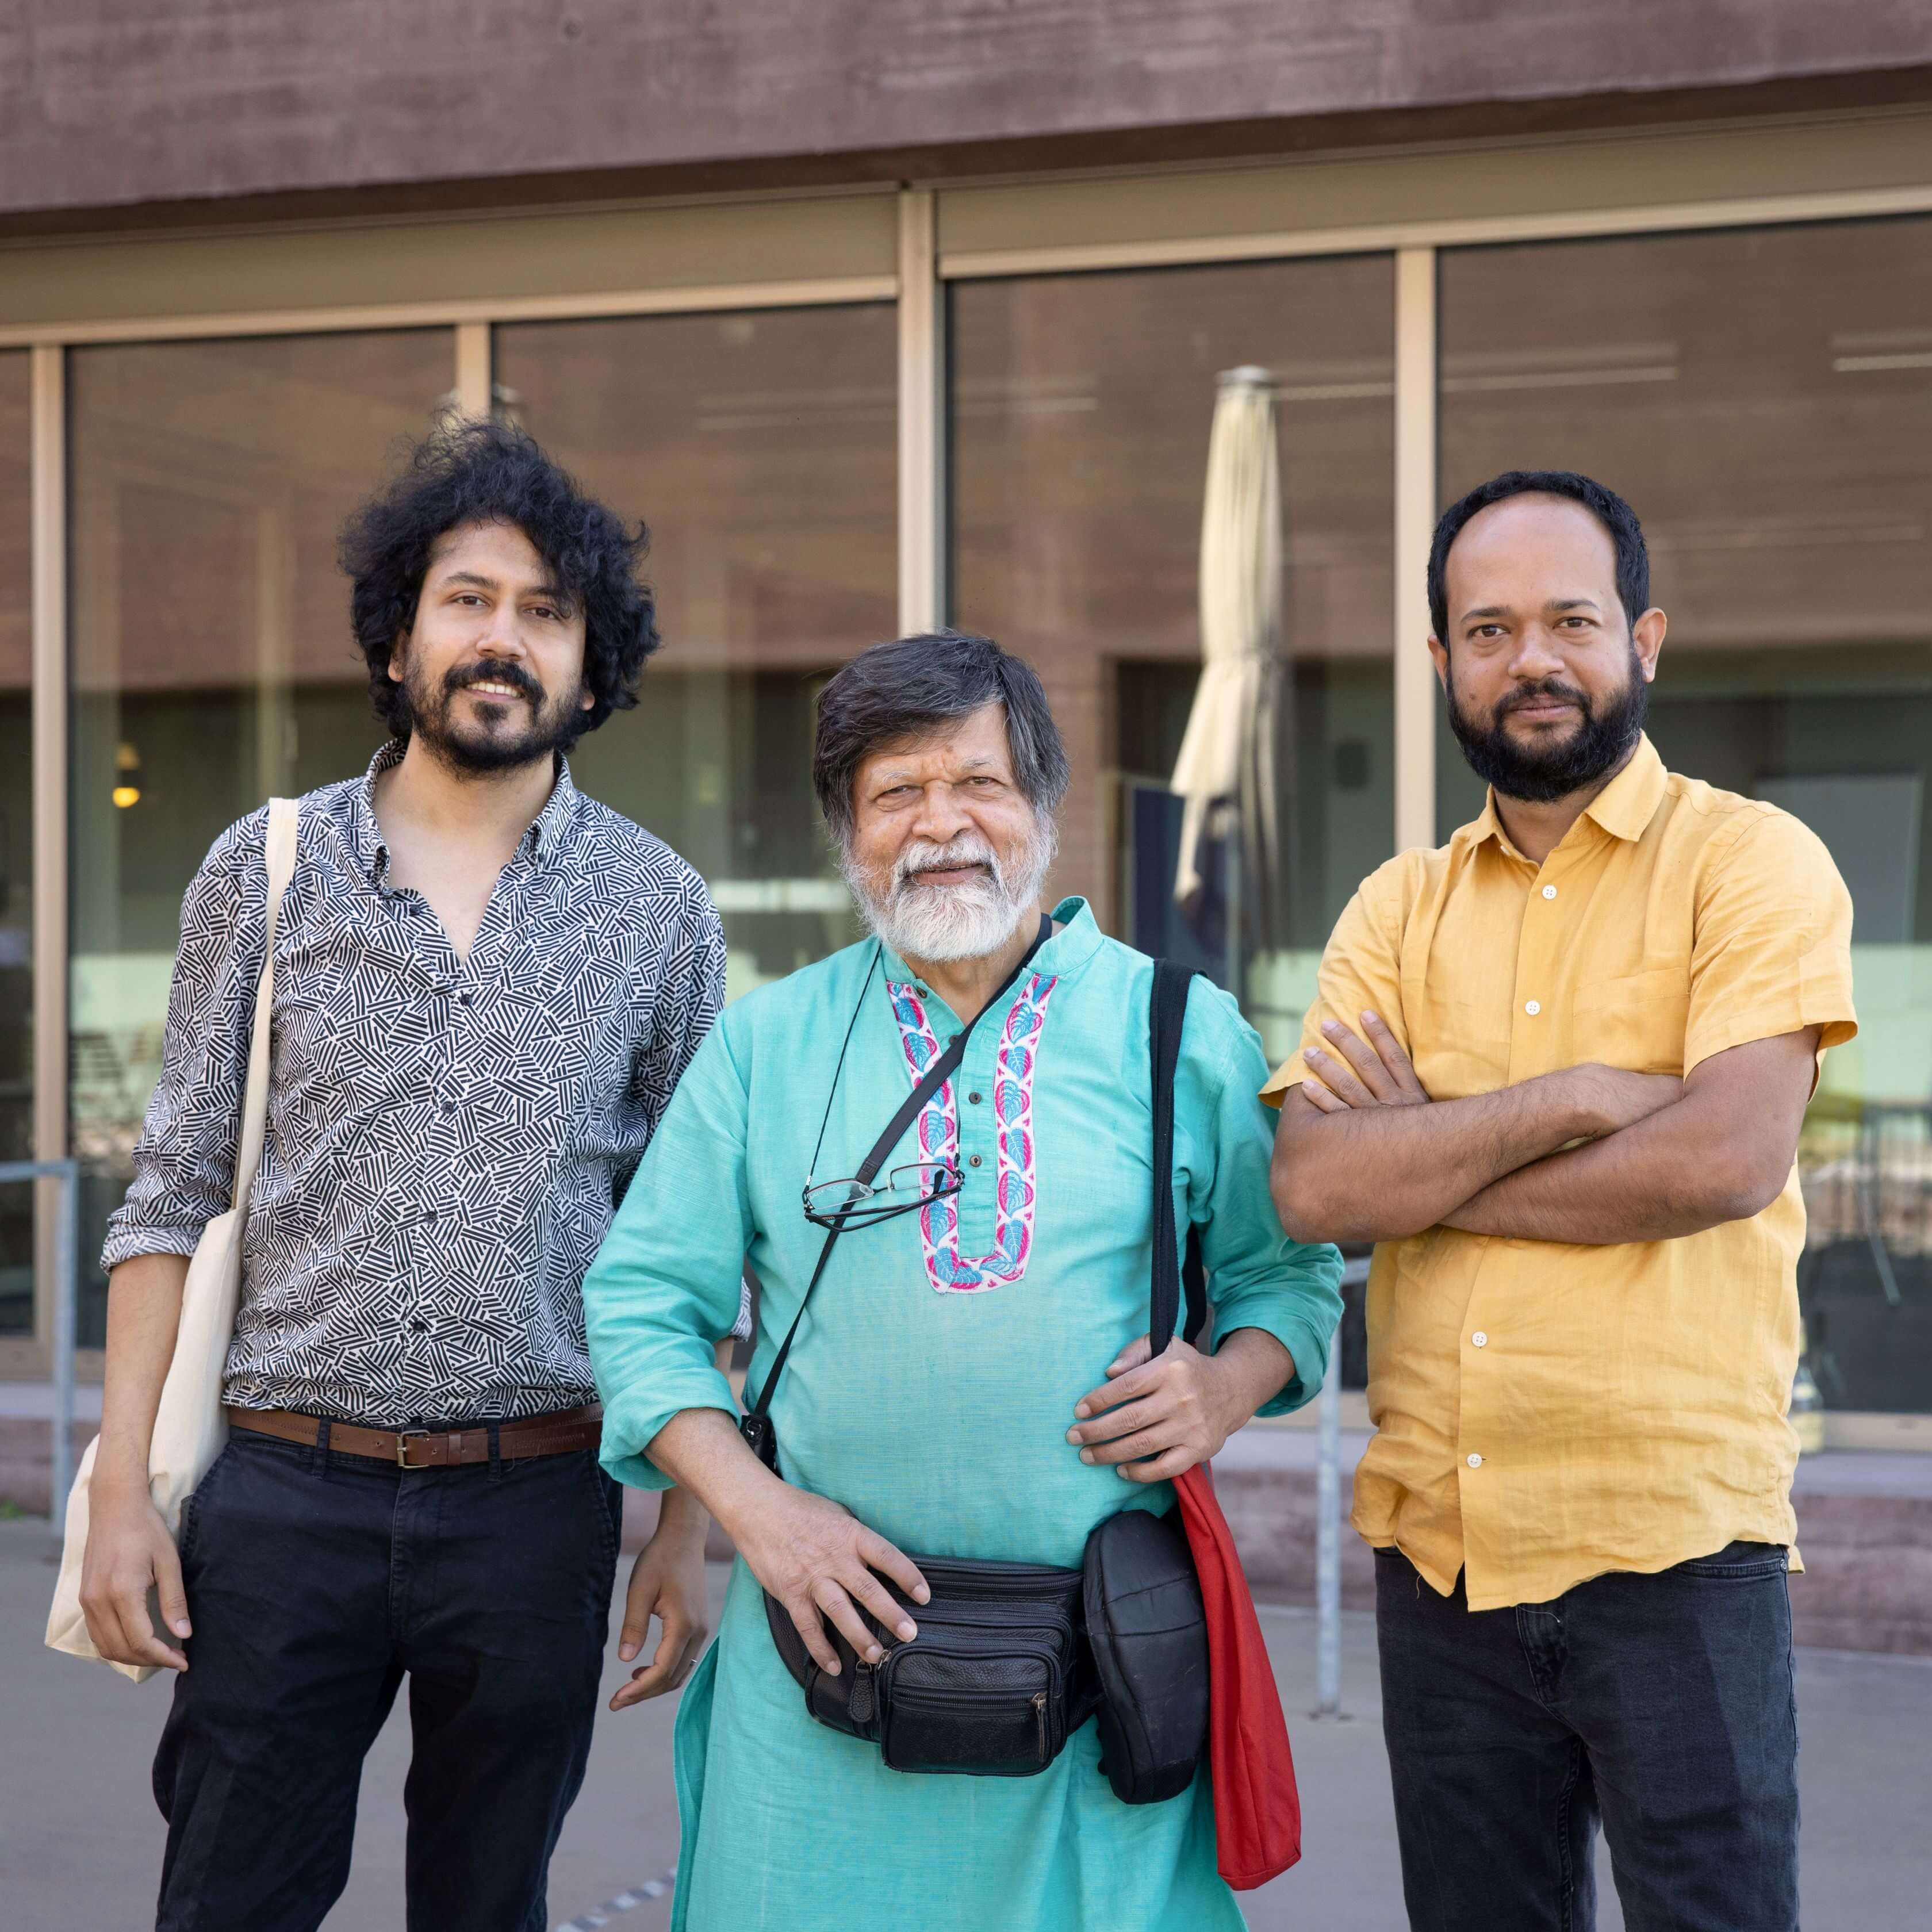 Portrait of Tanzim Wahab, Shahidul Alam and Munem Wasif (from left to right)